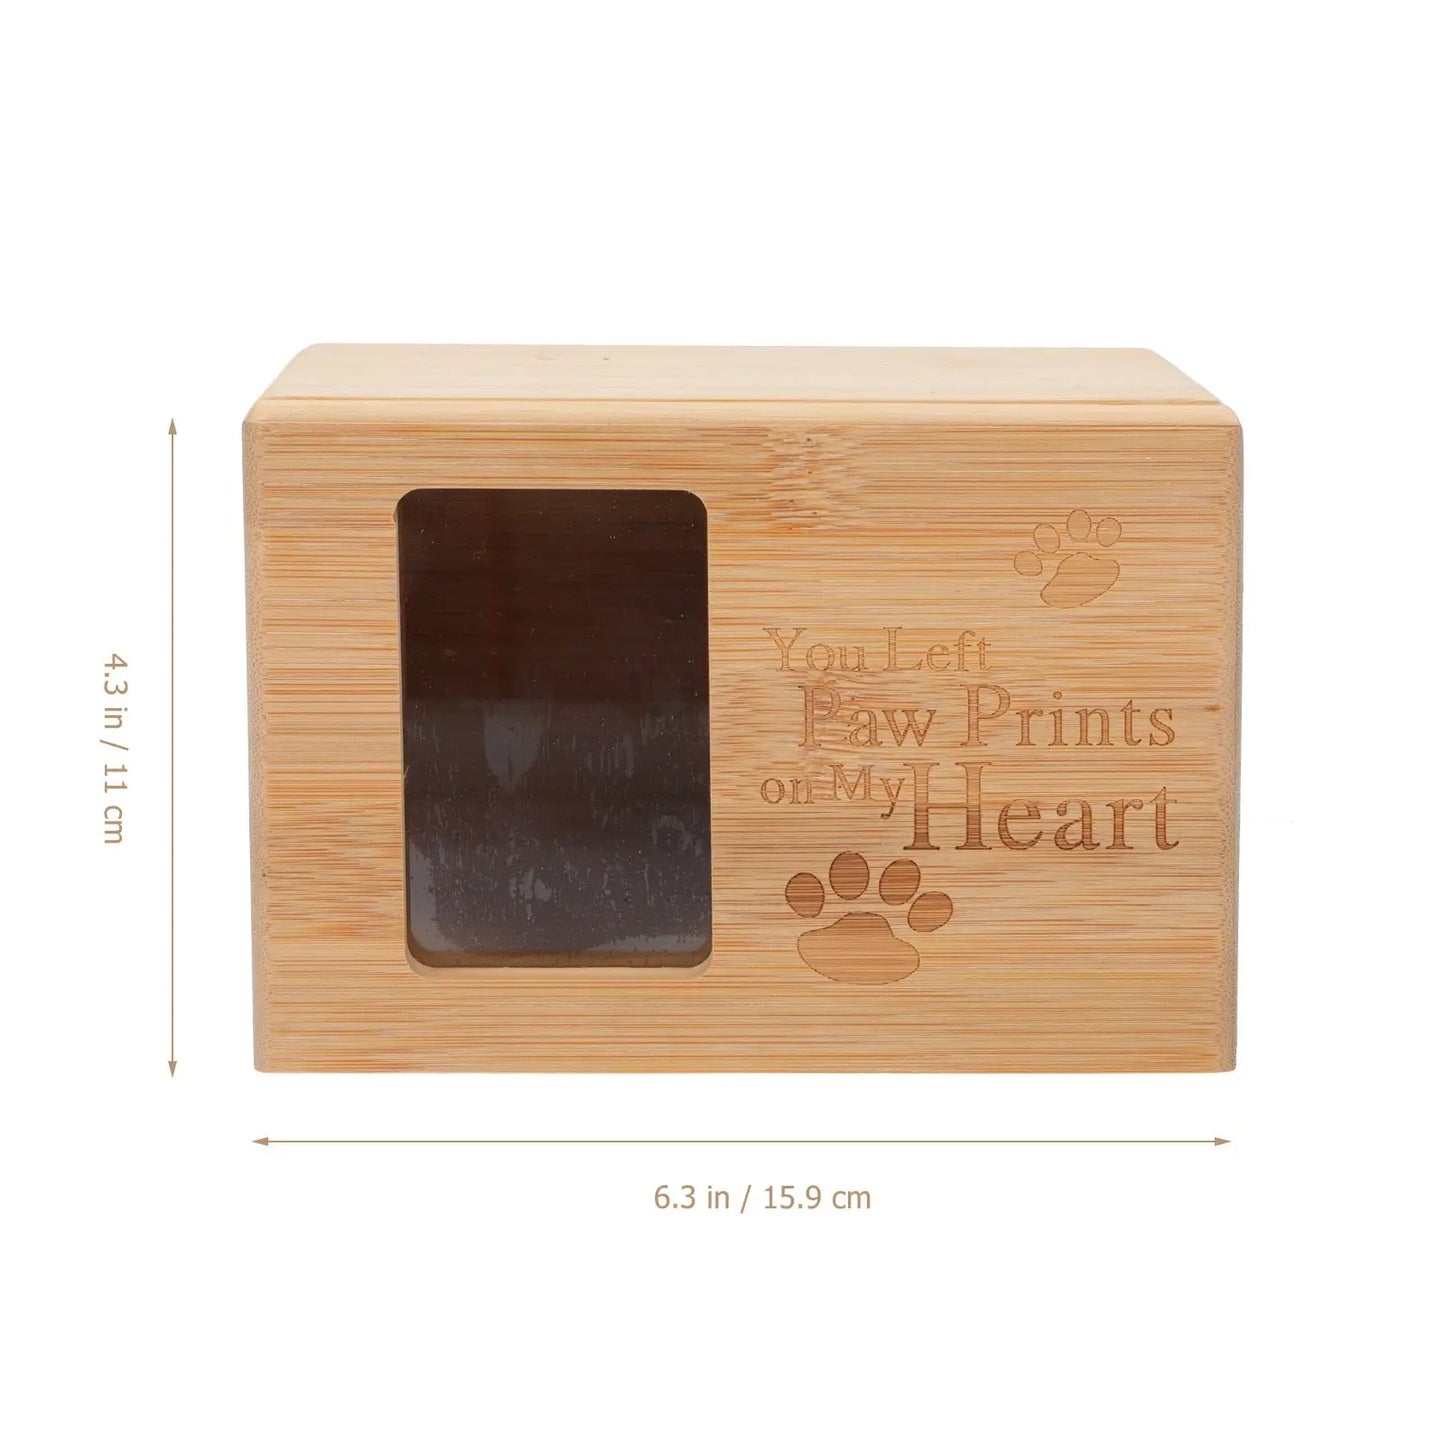 Dashuri Pet Ashes Urn-Pet Urn for Ashes-Cremation Urns- The cremation urns for ashes and keepsakes for ashes come in a variety of styles to suit most tastes, decor and different volumes of funeral ashes.